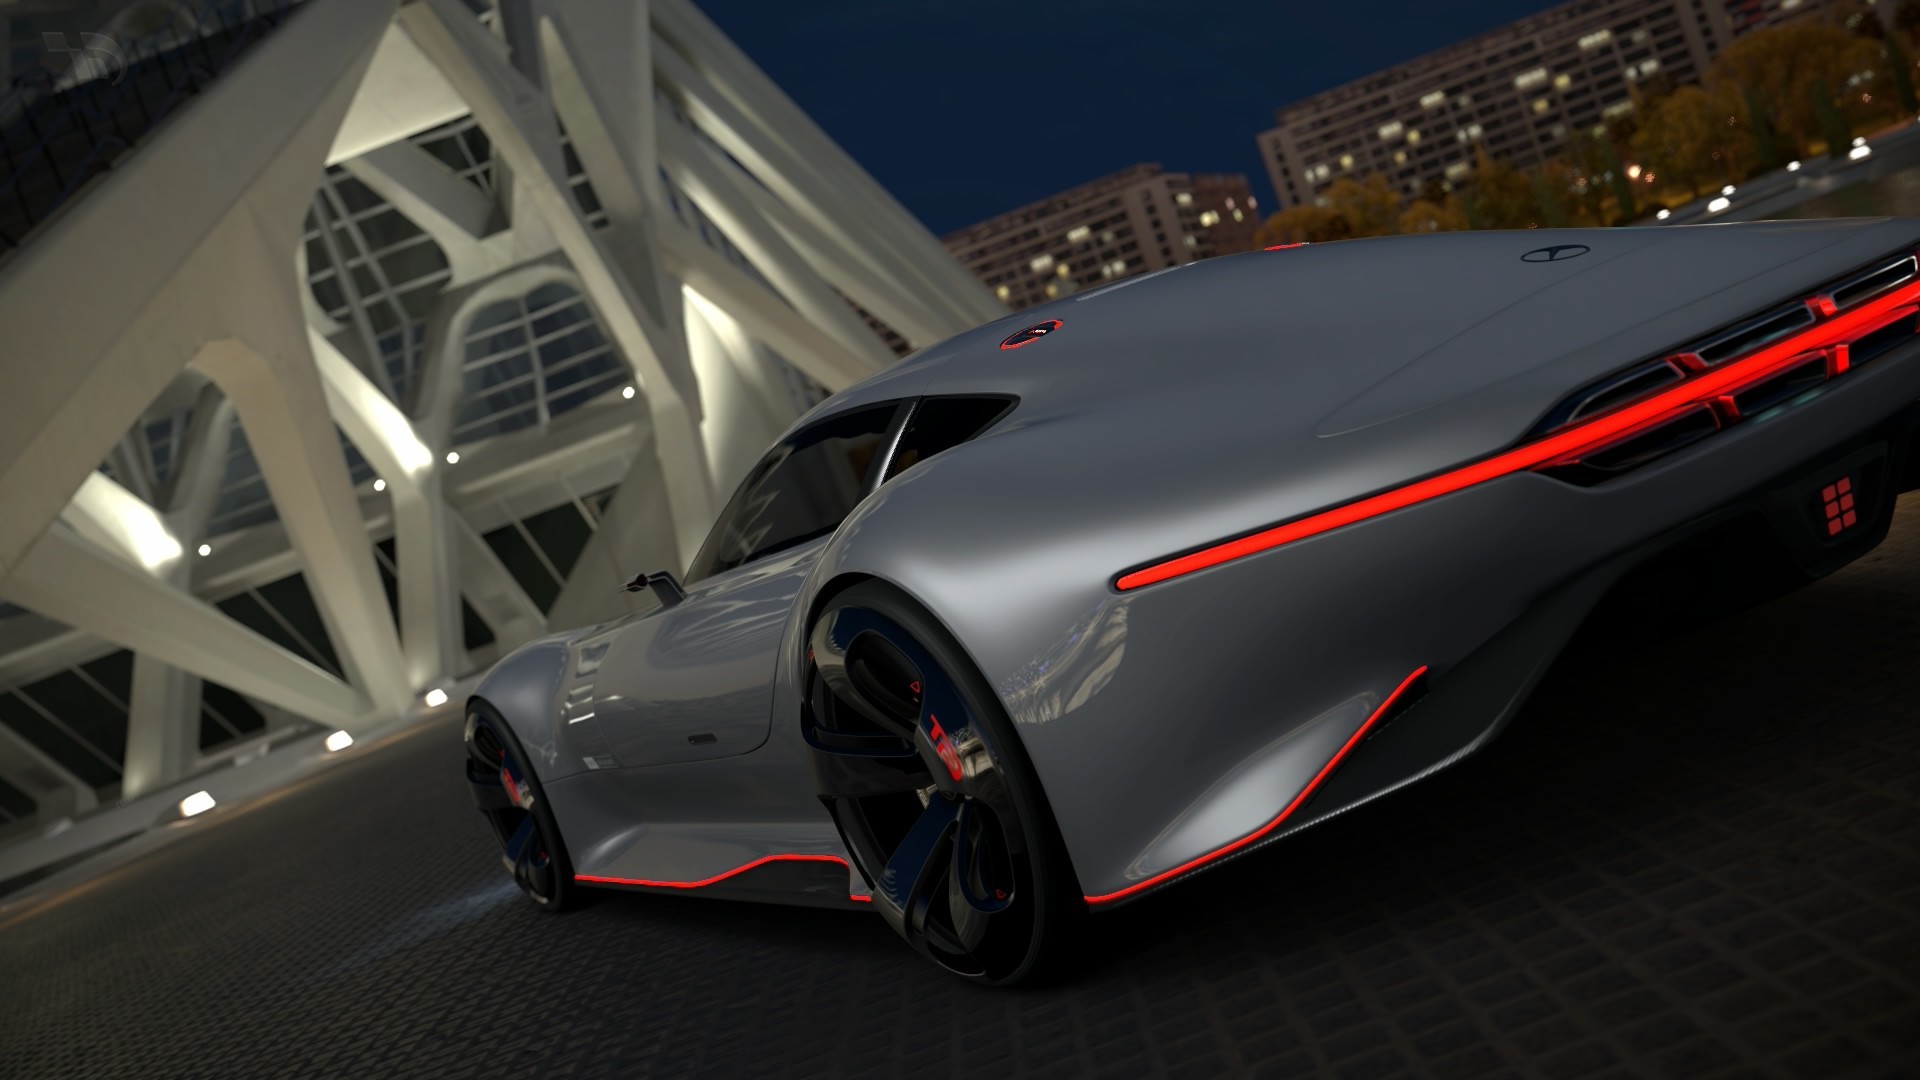 Mercedes-Benz Amg Vision Wallpapers